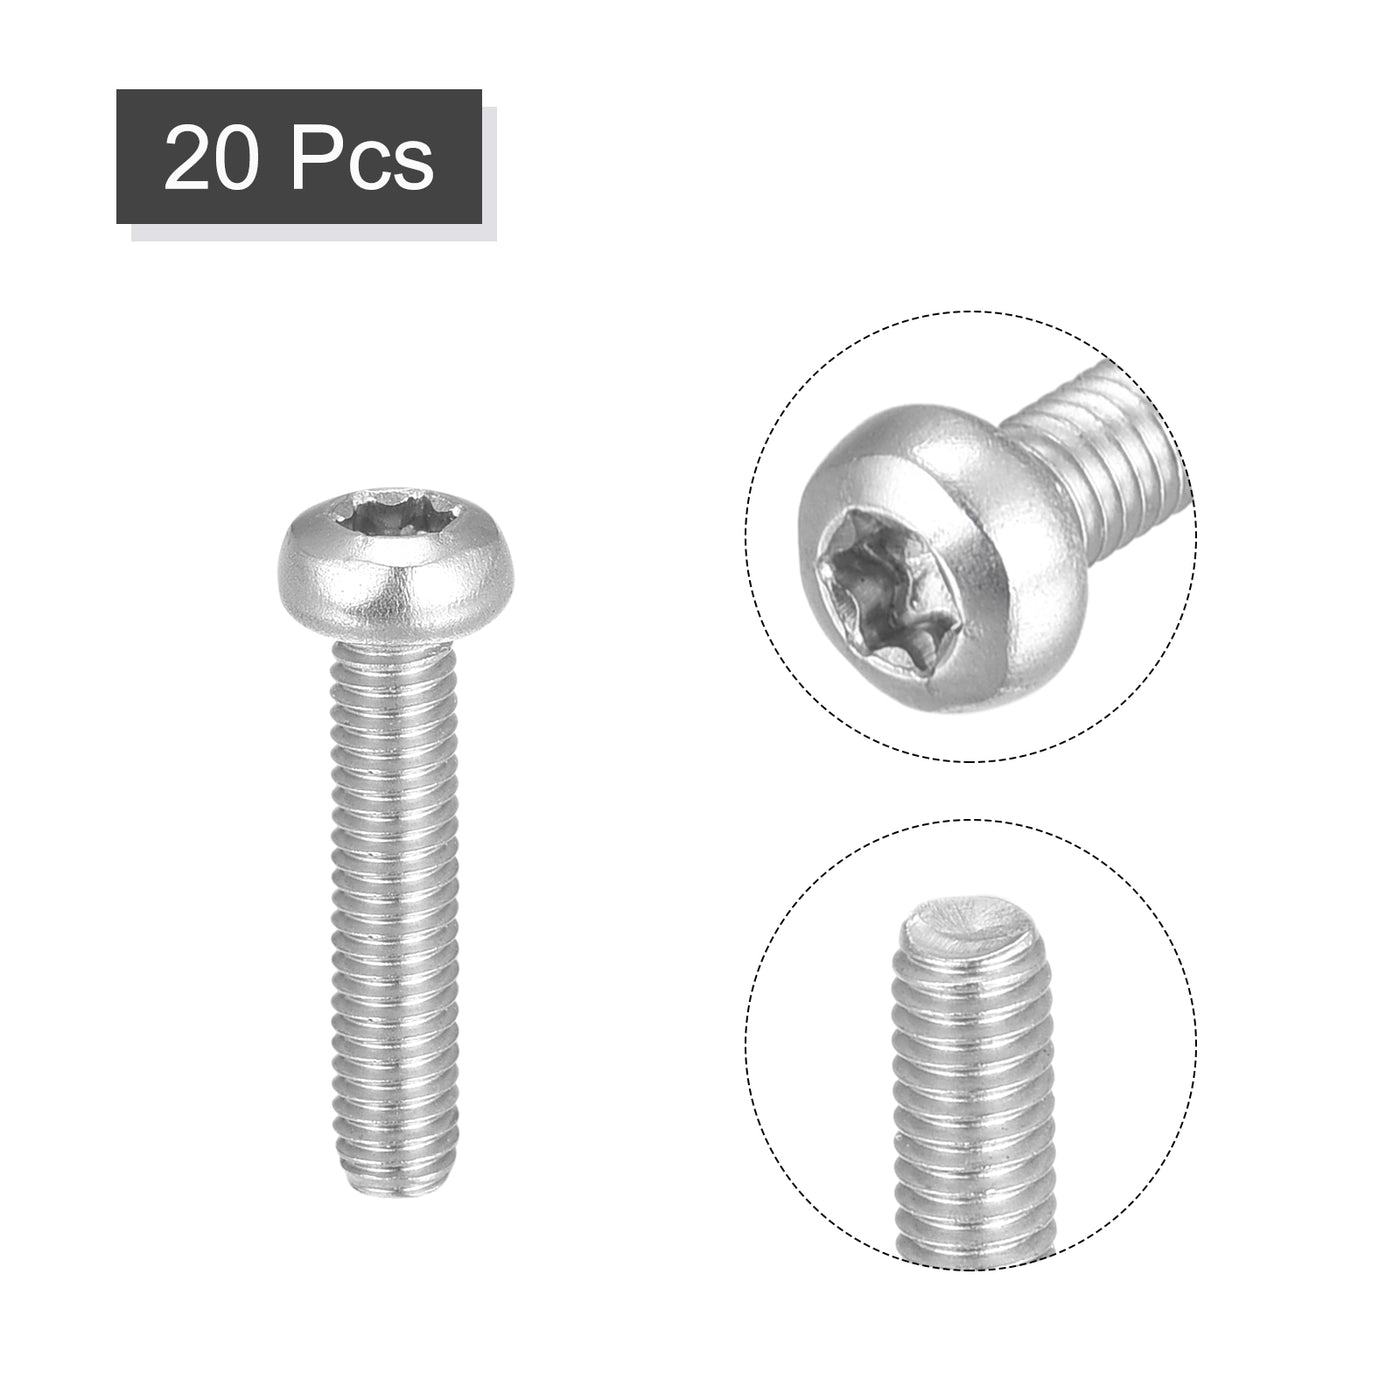 uxcell Uxcell M3x14mm Torx Security Machine Screws, 20pcs 316 Stainless Steel Pan Head Screw